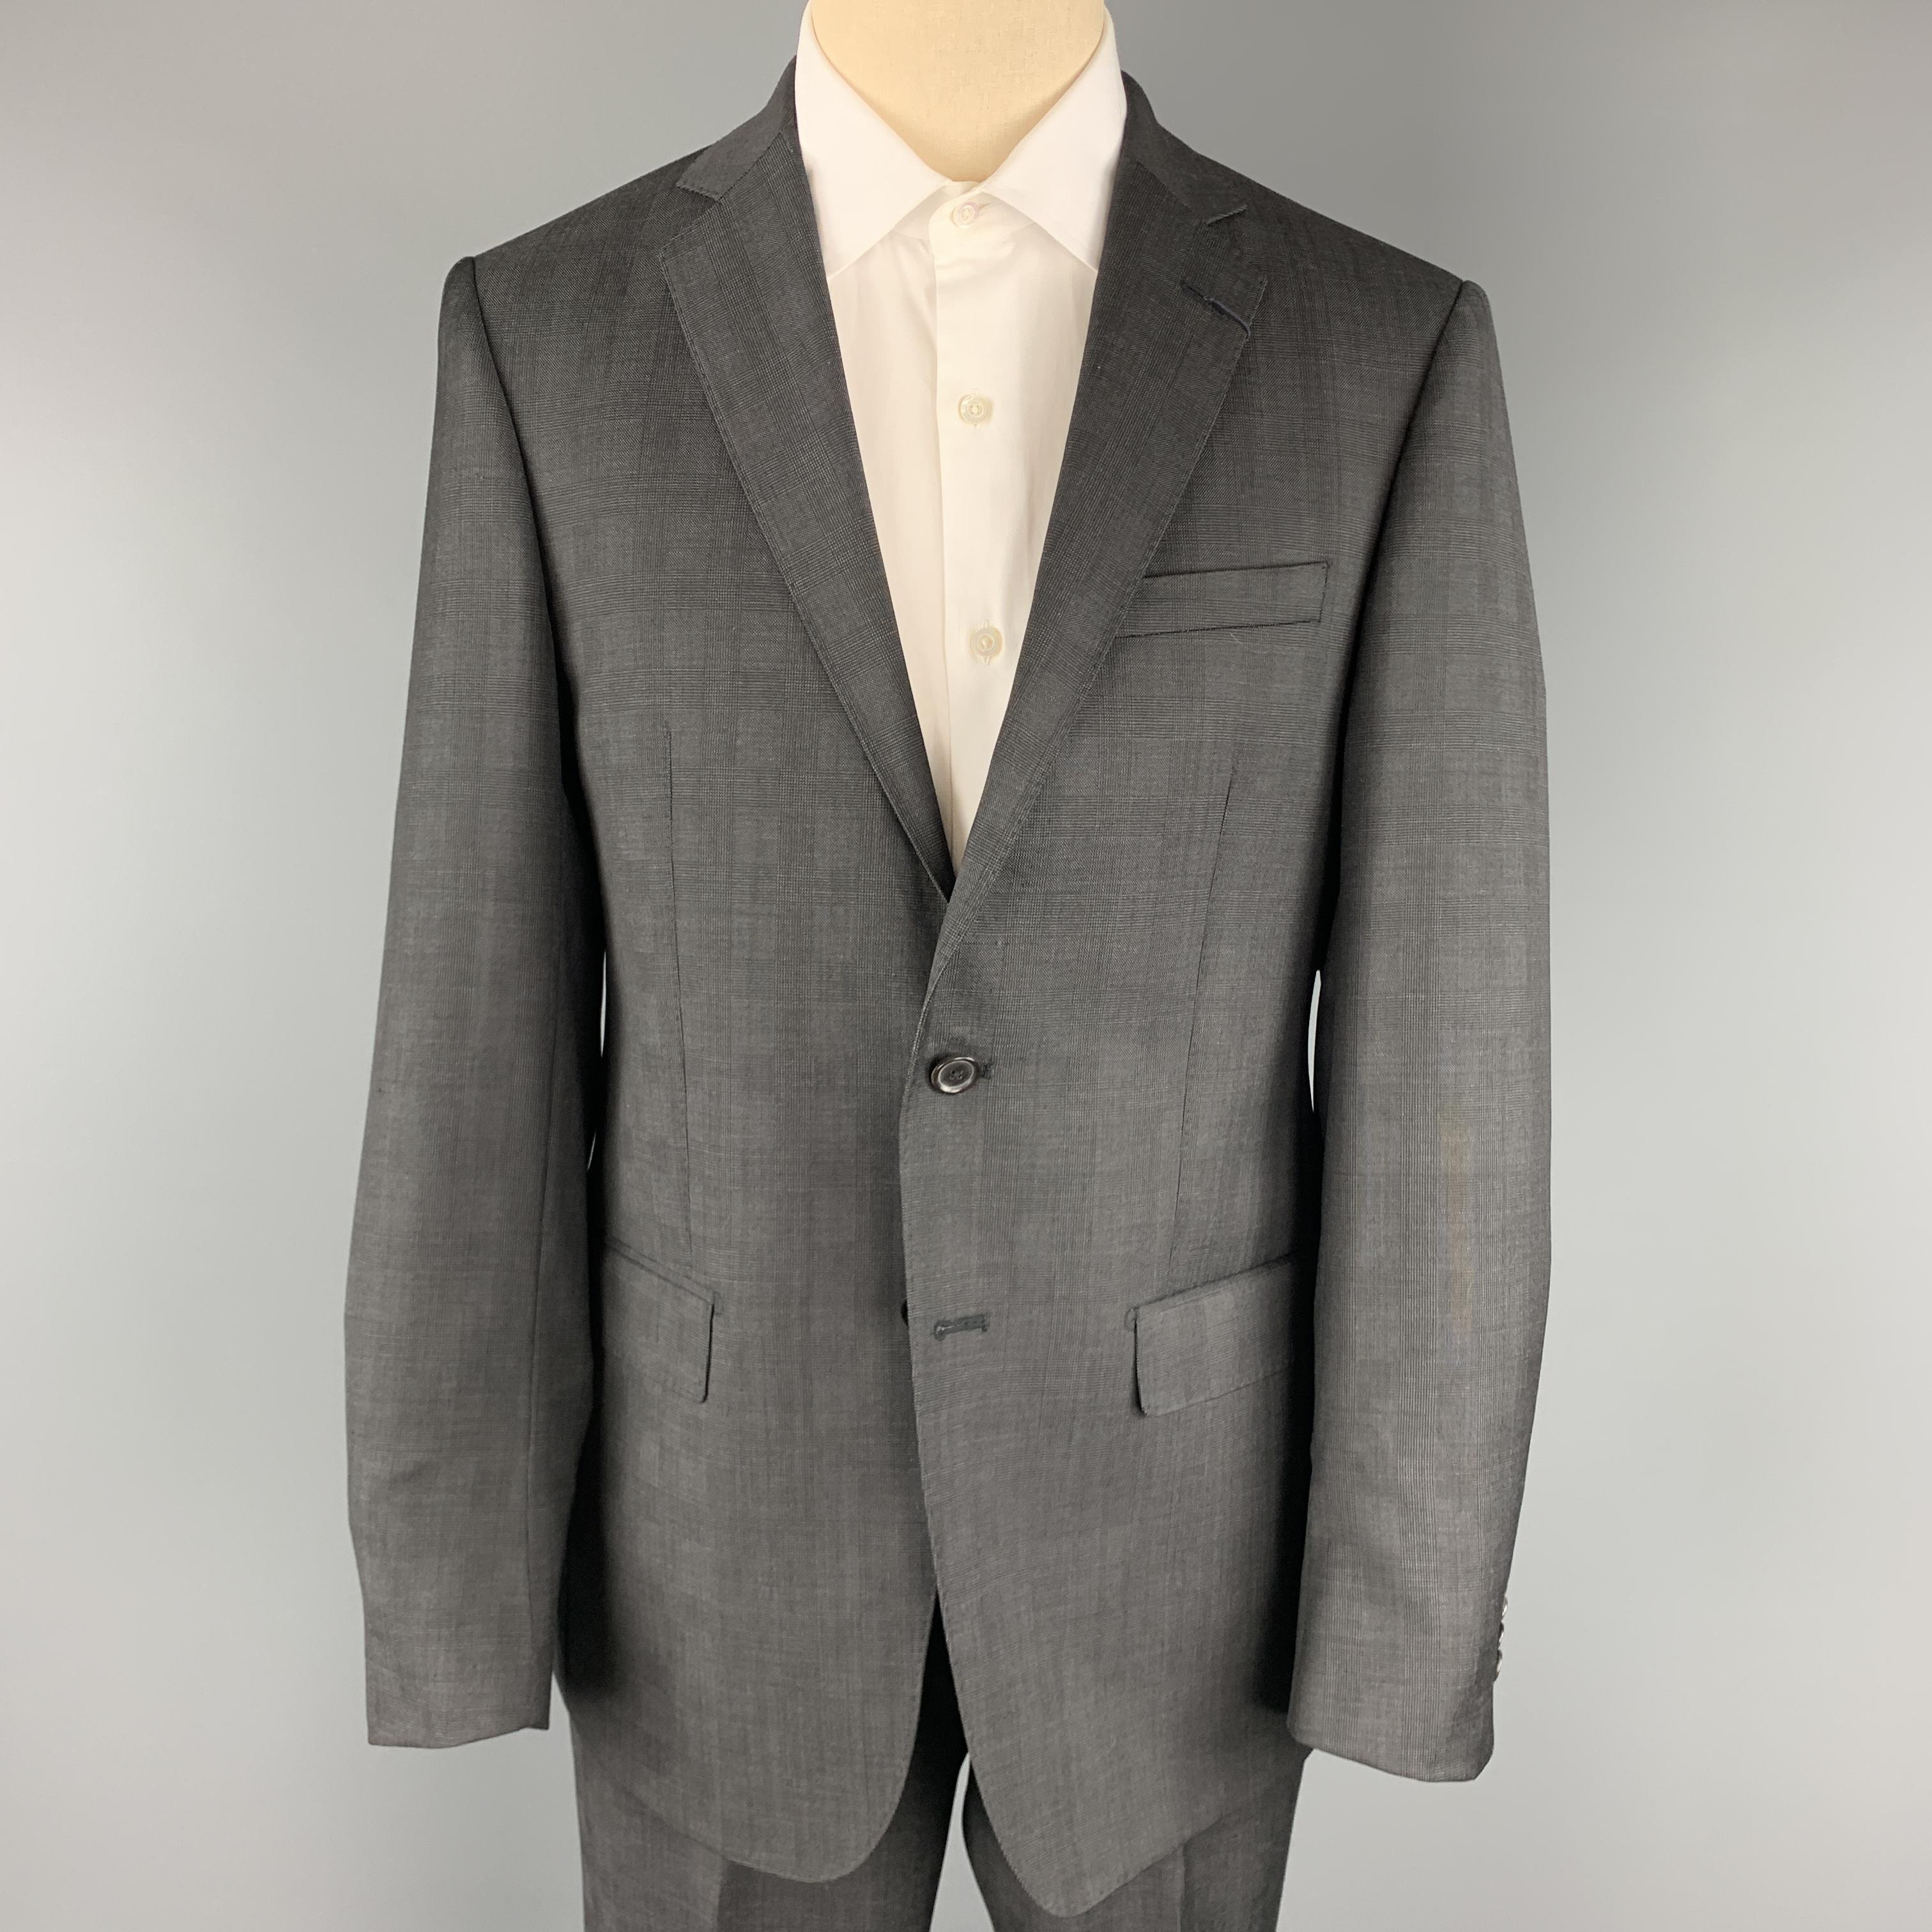 ELOE TAHARI suit comes in charcoal glenplaid wool and includes a single breasted, two button sport coat with notch lapel and matching flat front trousers. Made in Canada.

New with Tags.
Marked: 40 REG

Measurements:

-Jacket
Shoulder: 17